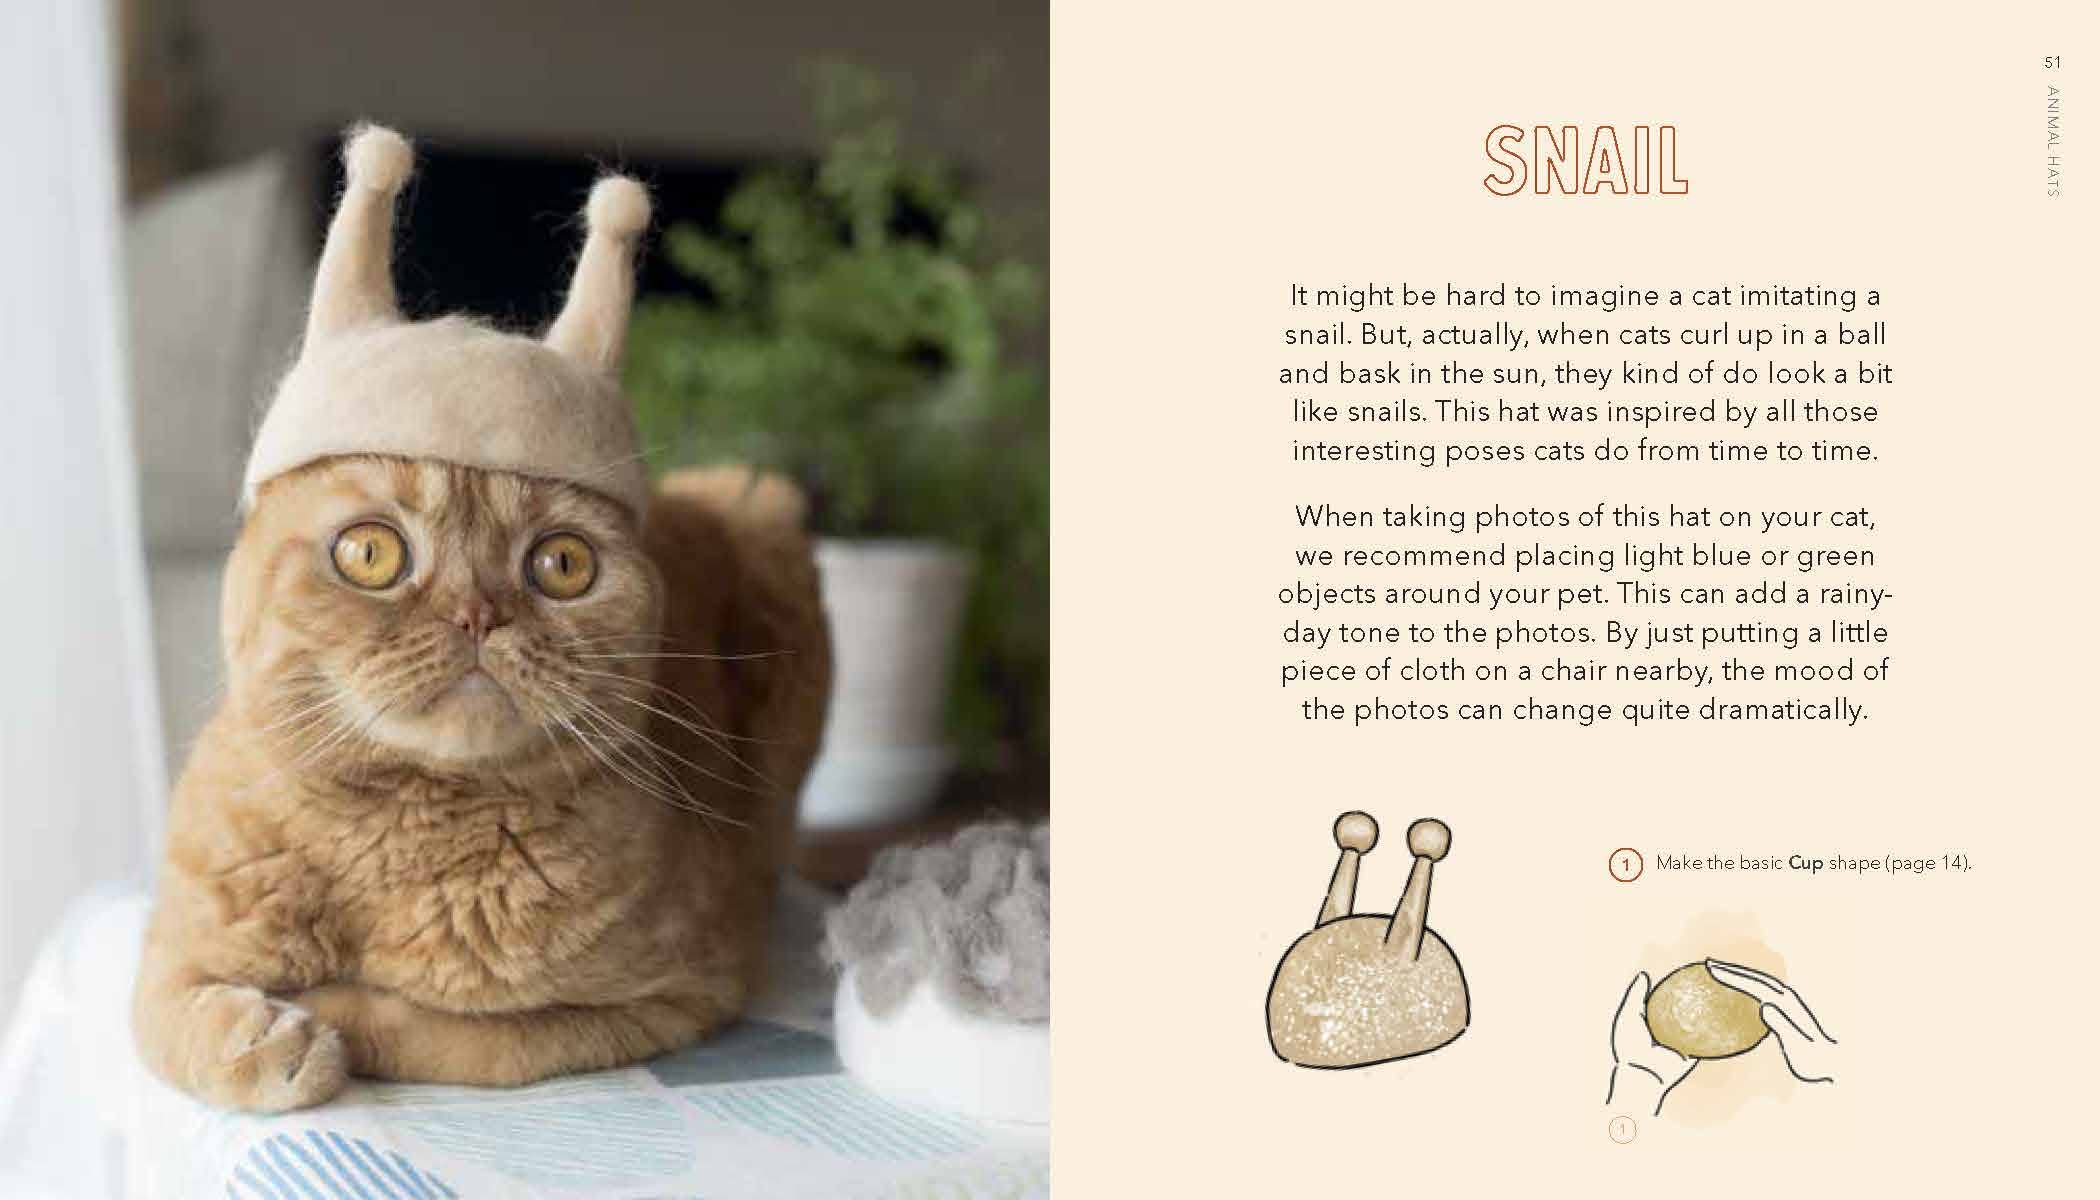 Cat-Hair Hats for Cats: Craft Fetching Headwear for Your Feline Friends